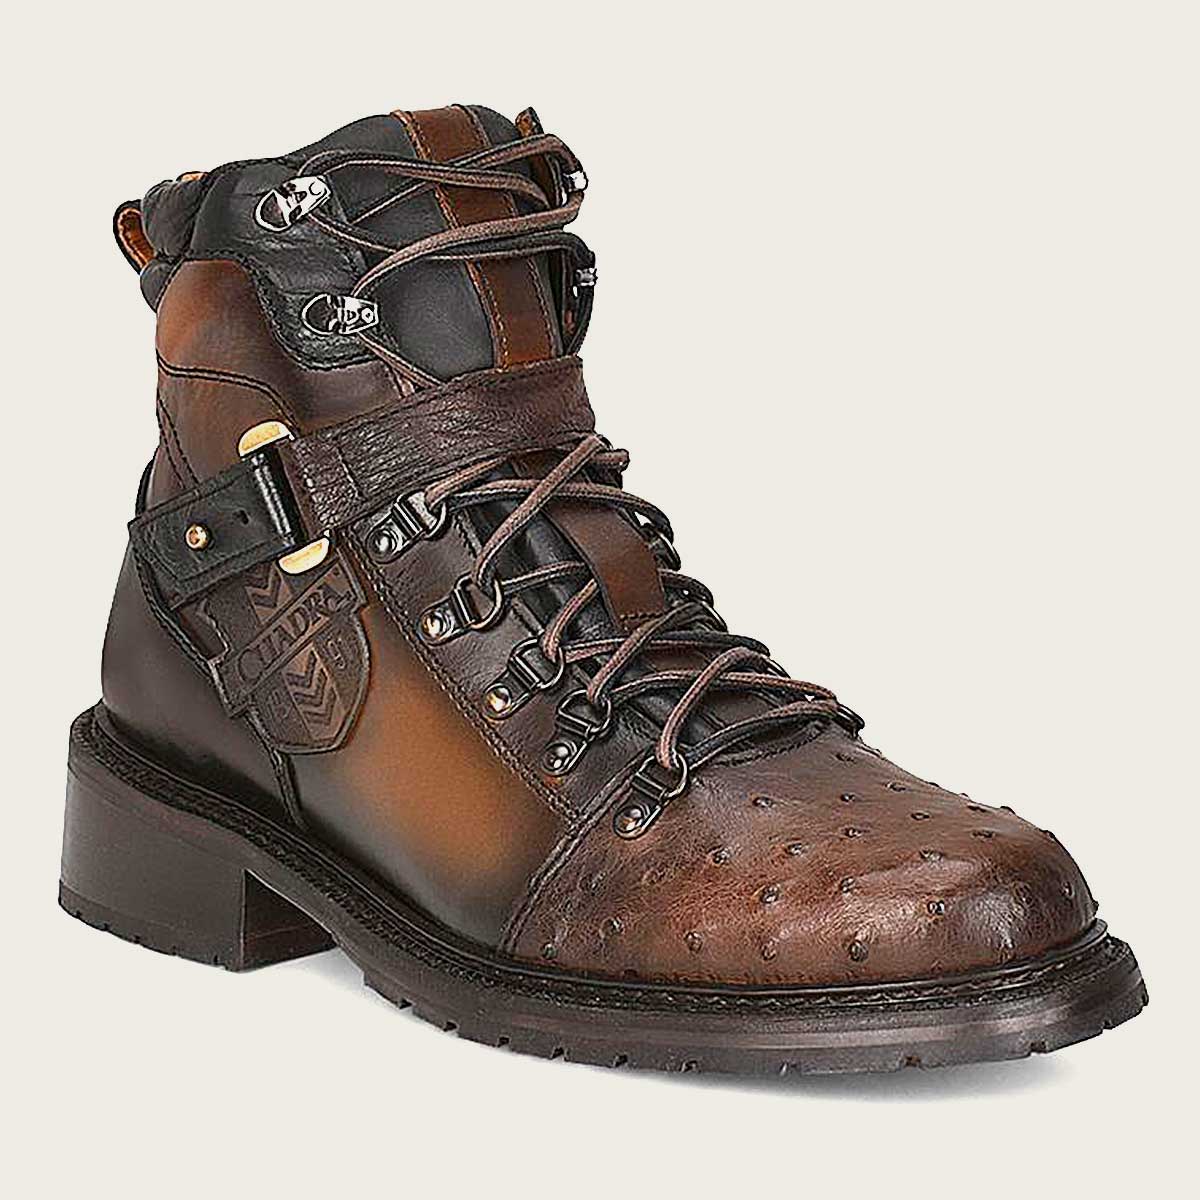 Upgrade your footwear with our urban brown ostrich leather boot - a perfect blend of style and sophistication